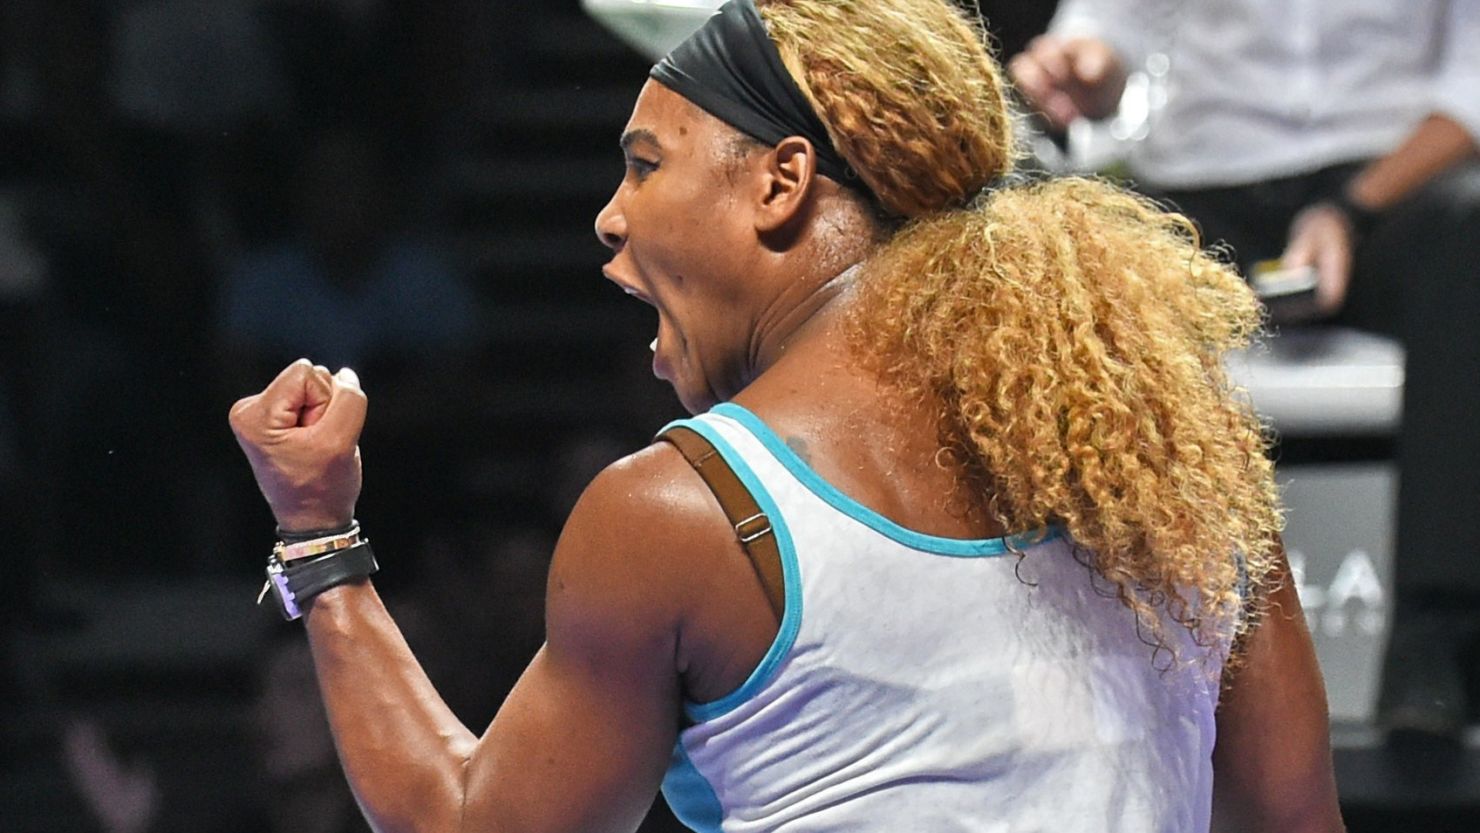 A pumpled up Serena Williams beats Simona Halep to win the WTA Finals title in Singapore.